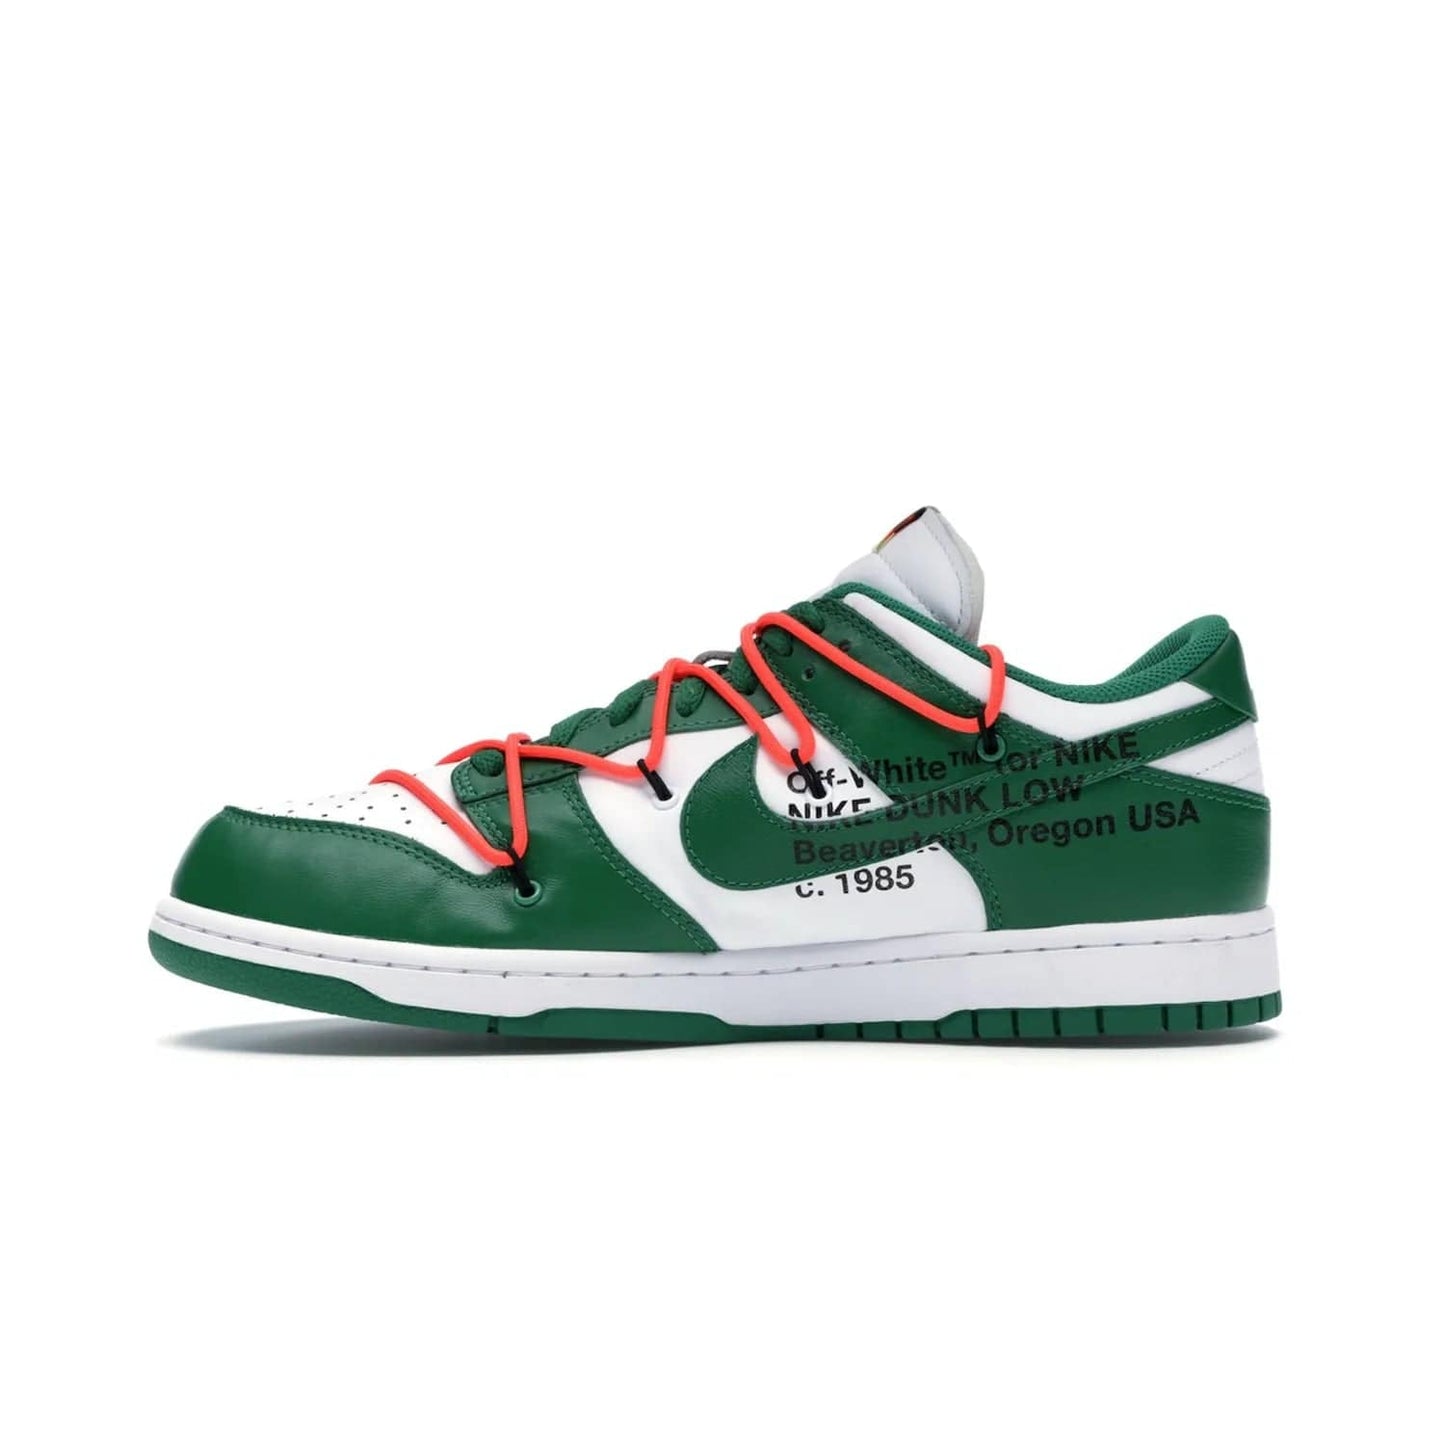 Nike Dunk Low Off-White Pine Green - Image 19 - Only at www.BallersClubKickz.com - The Nike Dunk Low Off-White Pine Green combines classic 1980s style with modern-day design. Featuring white leather uppers and pine green overlays, these classic kicks feature secondary lacing system, zip-ties and signature Off-White text. Releasing in December 2019, these shoes are a timeless classic for any wardrobe.